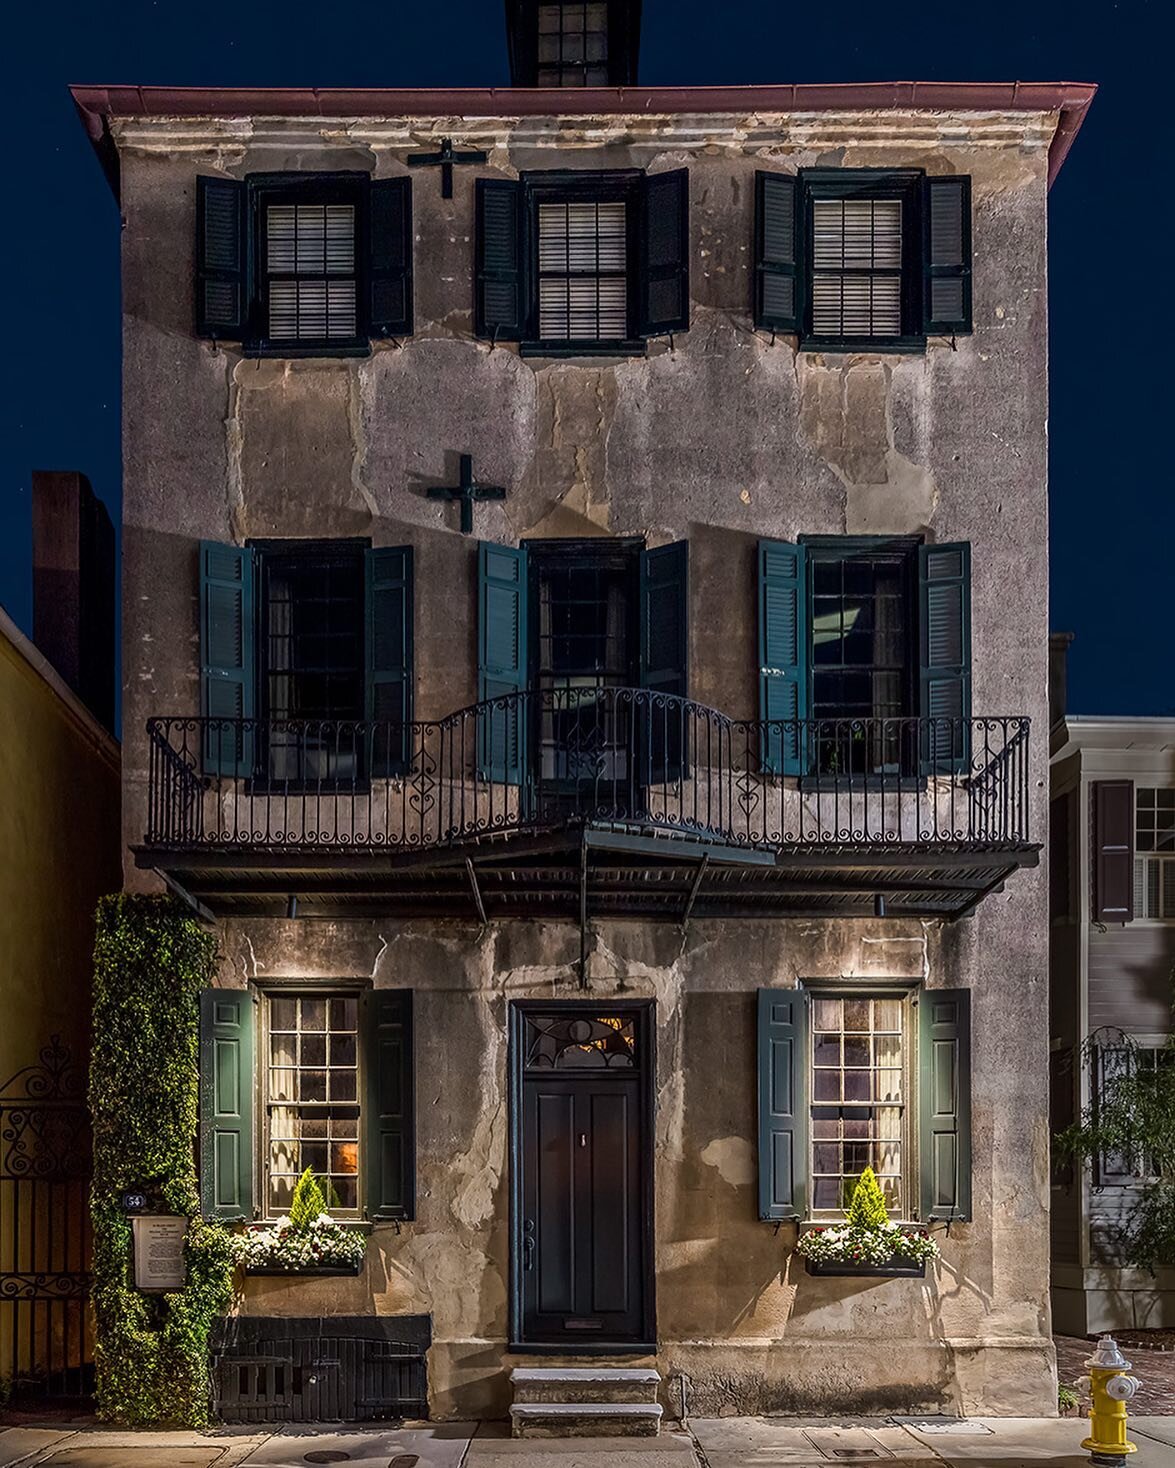 William Vanderhorst House - 54 Tradd Street, Charleston

Tradition holds that the front room of this structure served as the first post office in Charleston, South Carolina before 1753*. Constructed in 1740, this house is an excellent example of earl